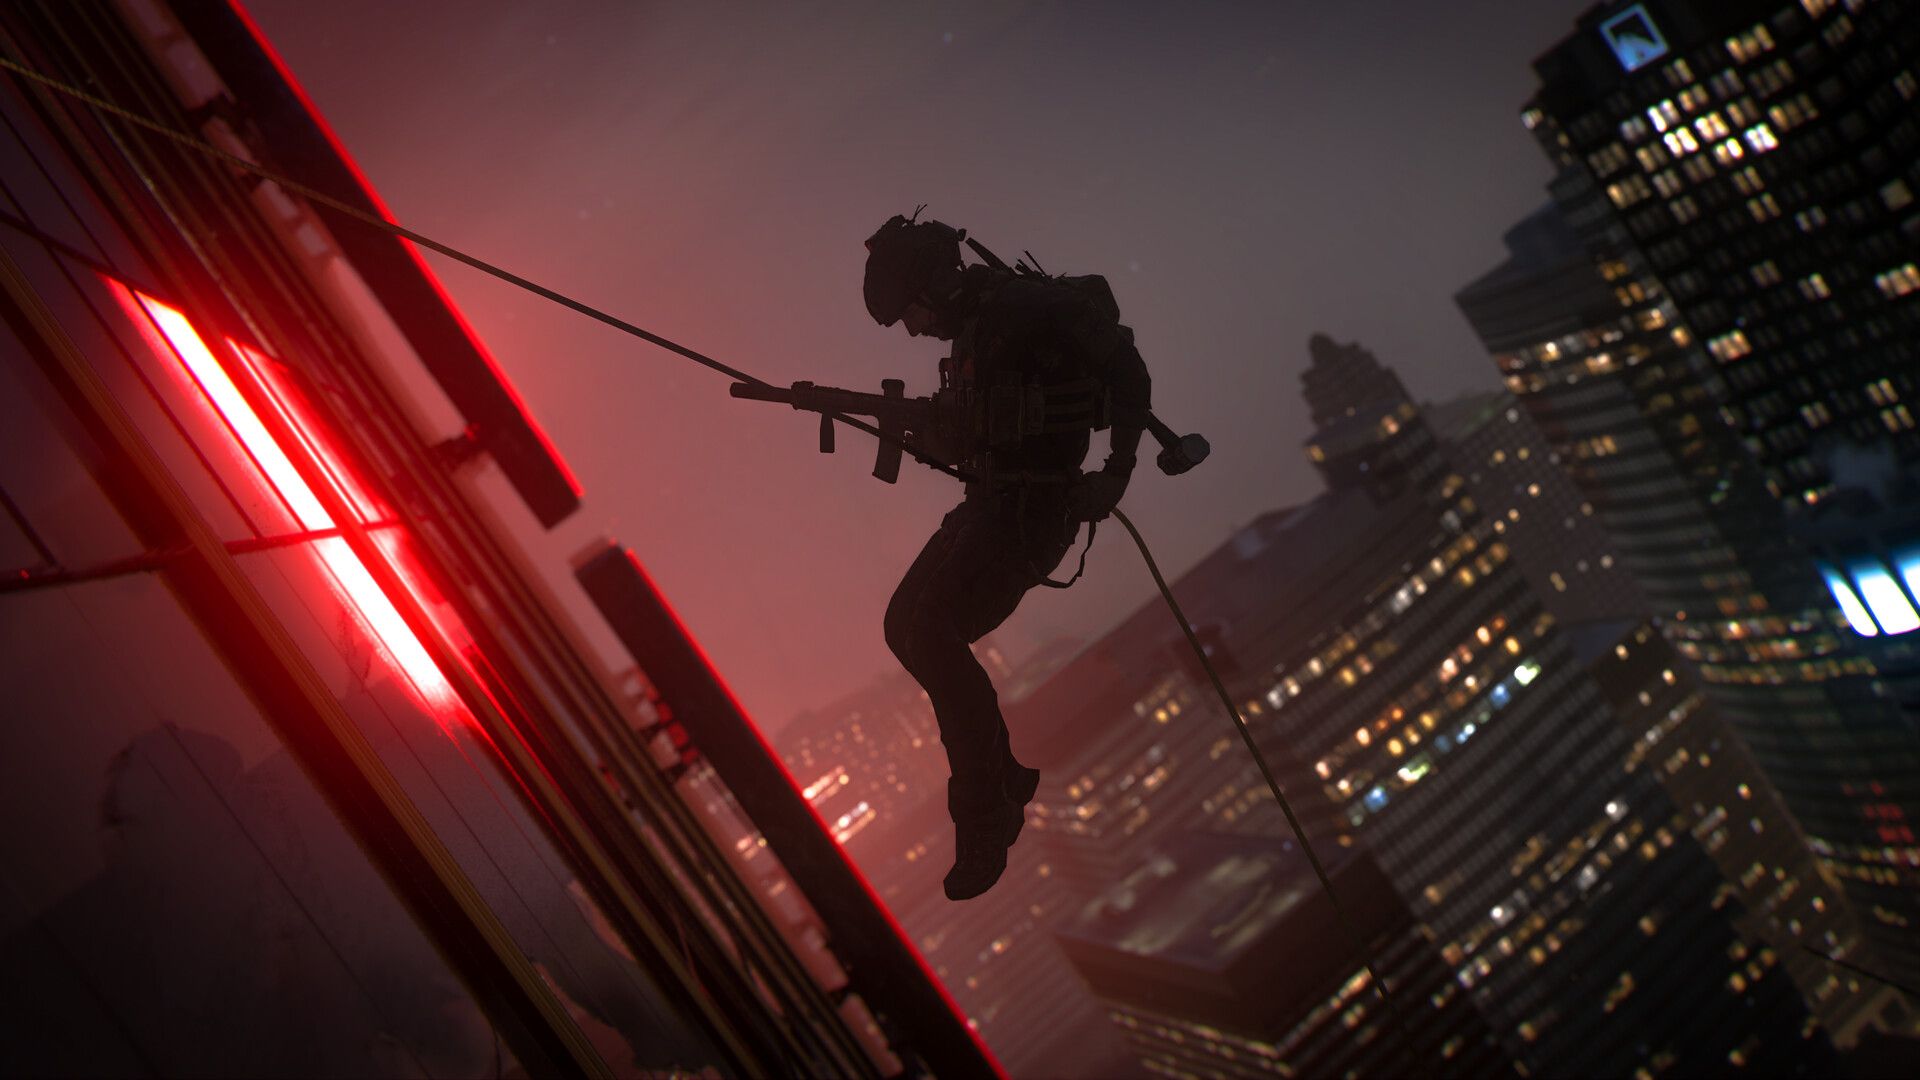 Video game screenshot of a soldier rappelling down the side of a skyscraper at night.